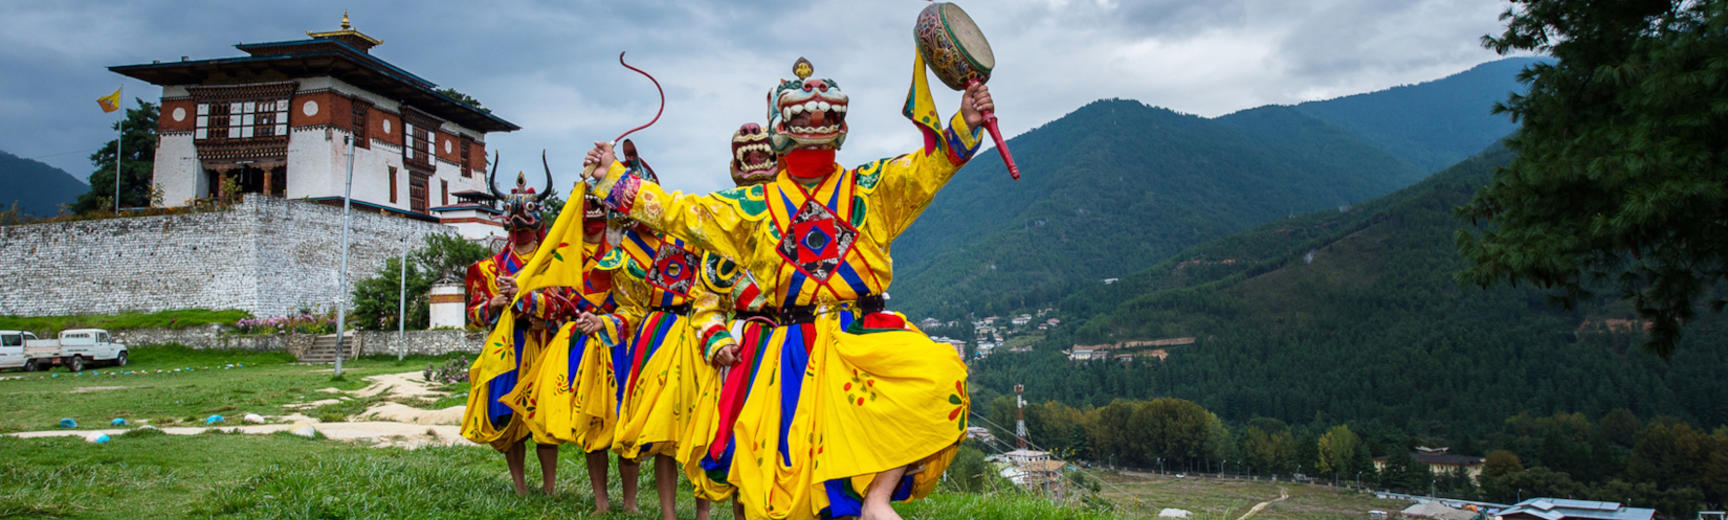 Costumed monks performing traditional dance in Tsechu festival at Thimphu Bhutan